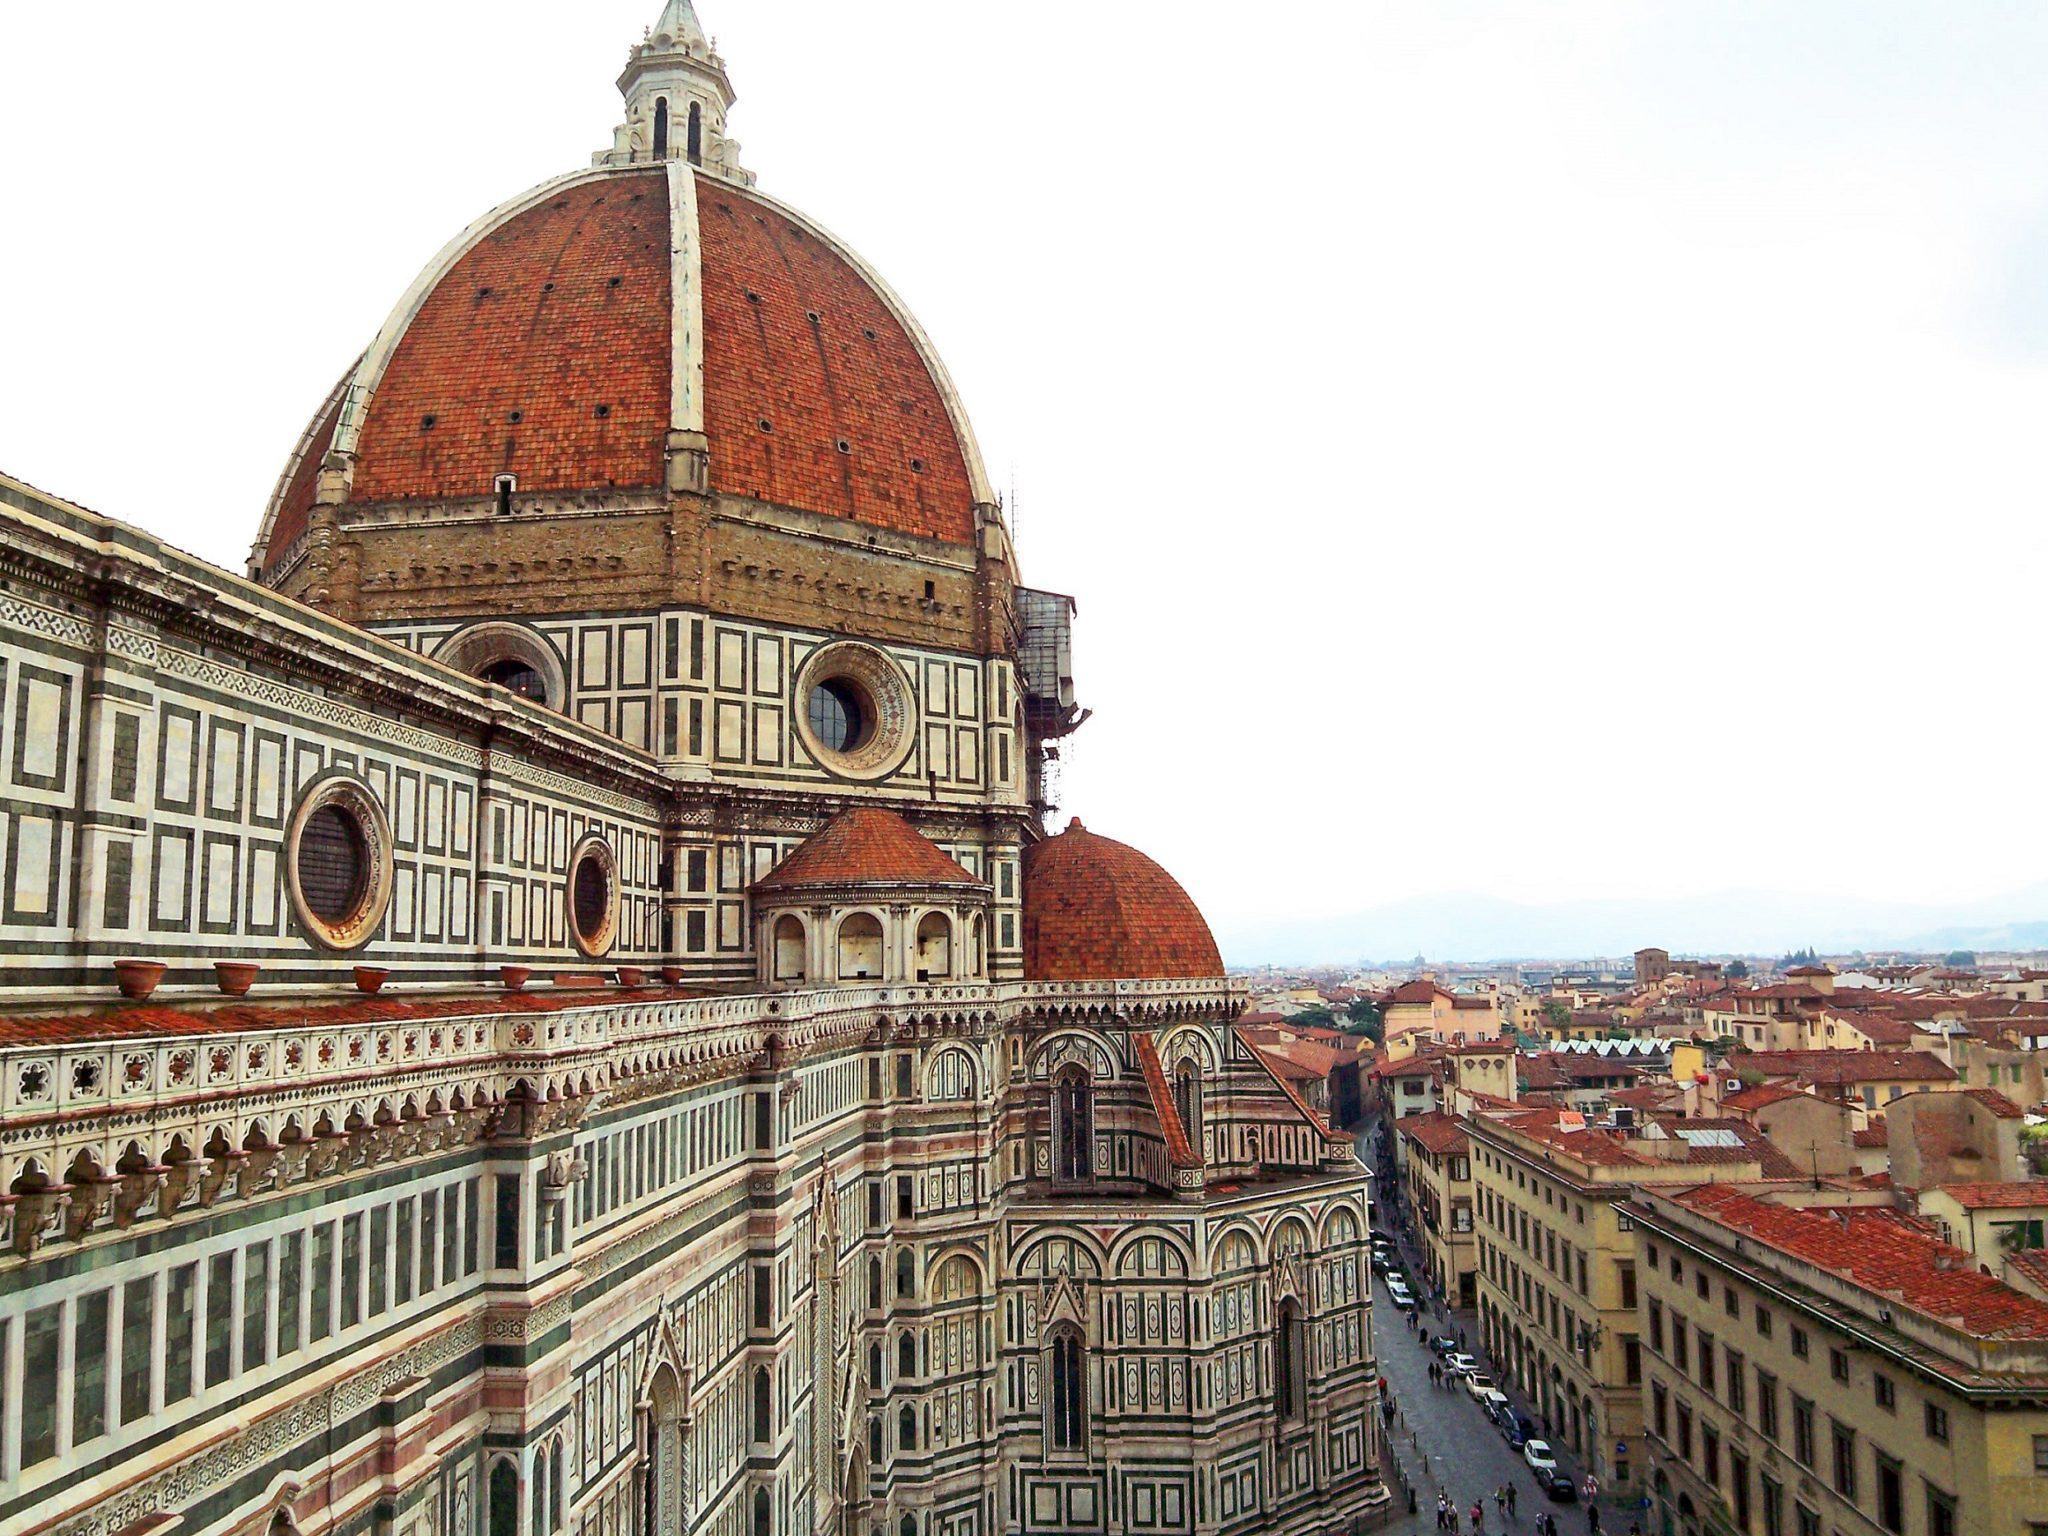 Colorful walls and dome of Santa Maria del Fiore in Florence, Italy